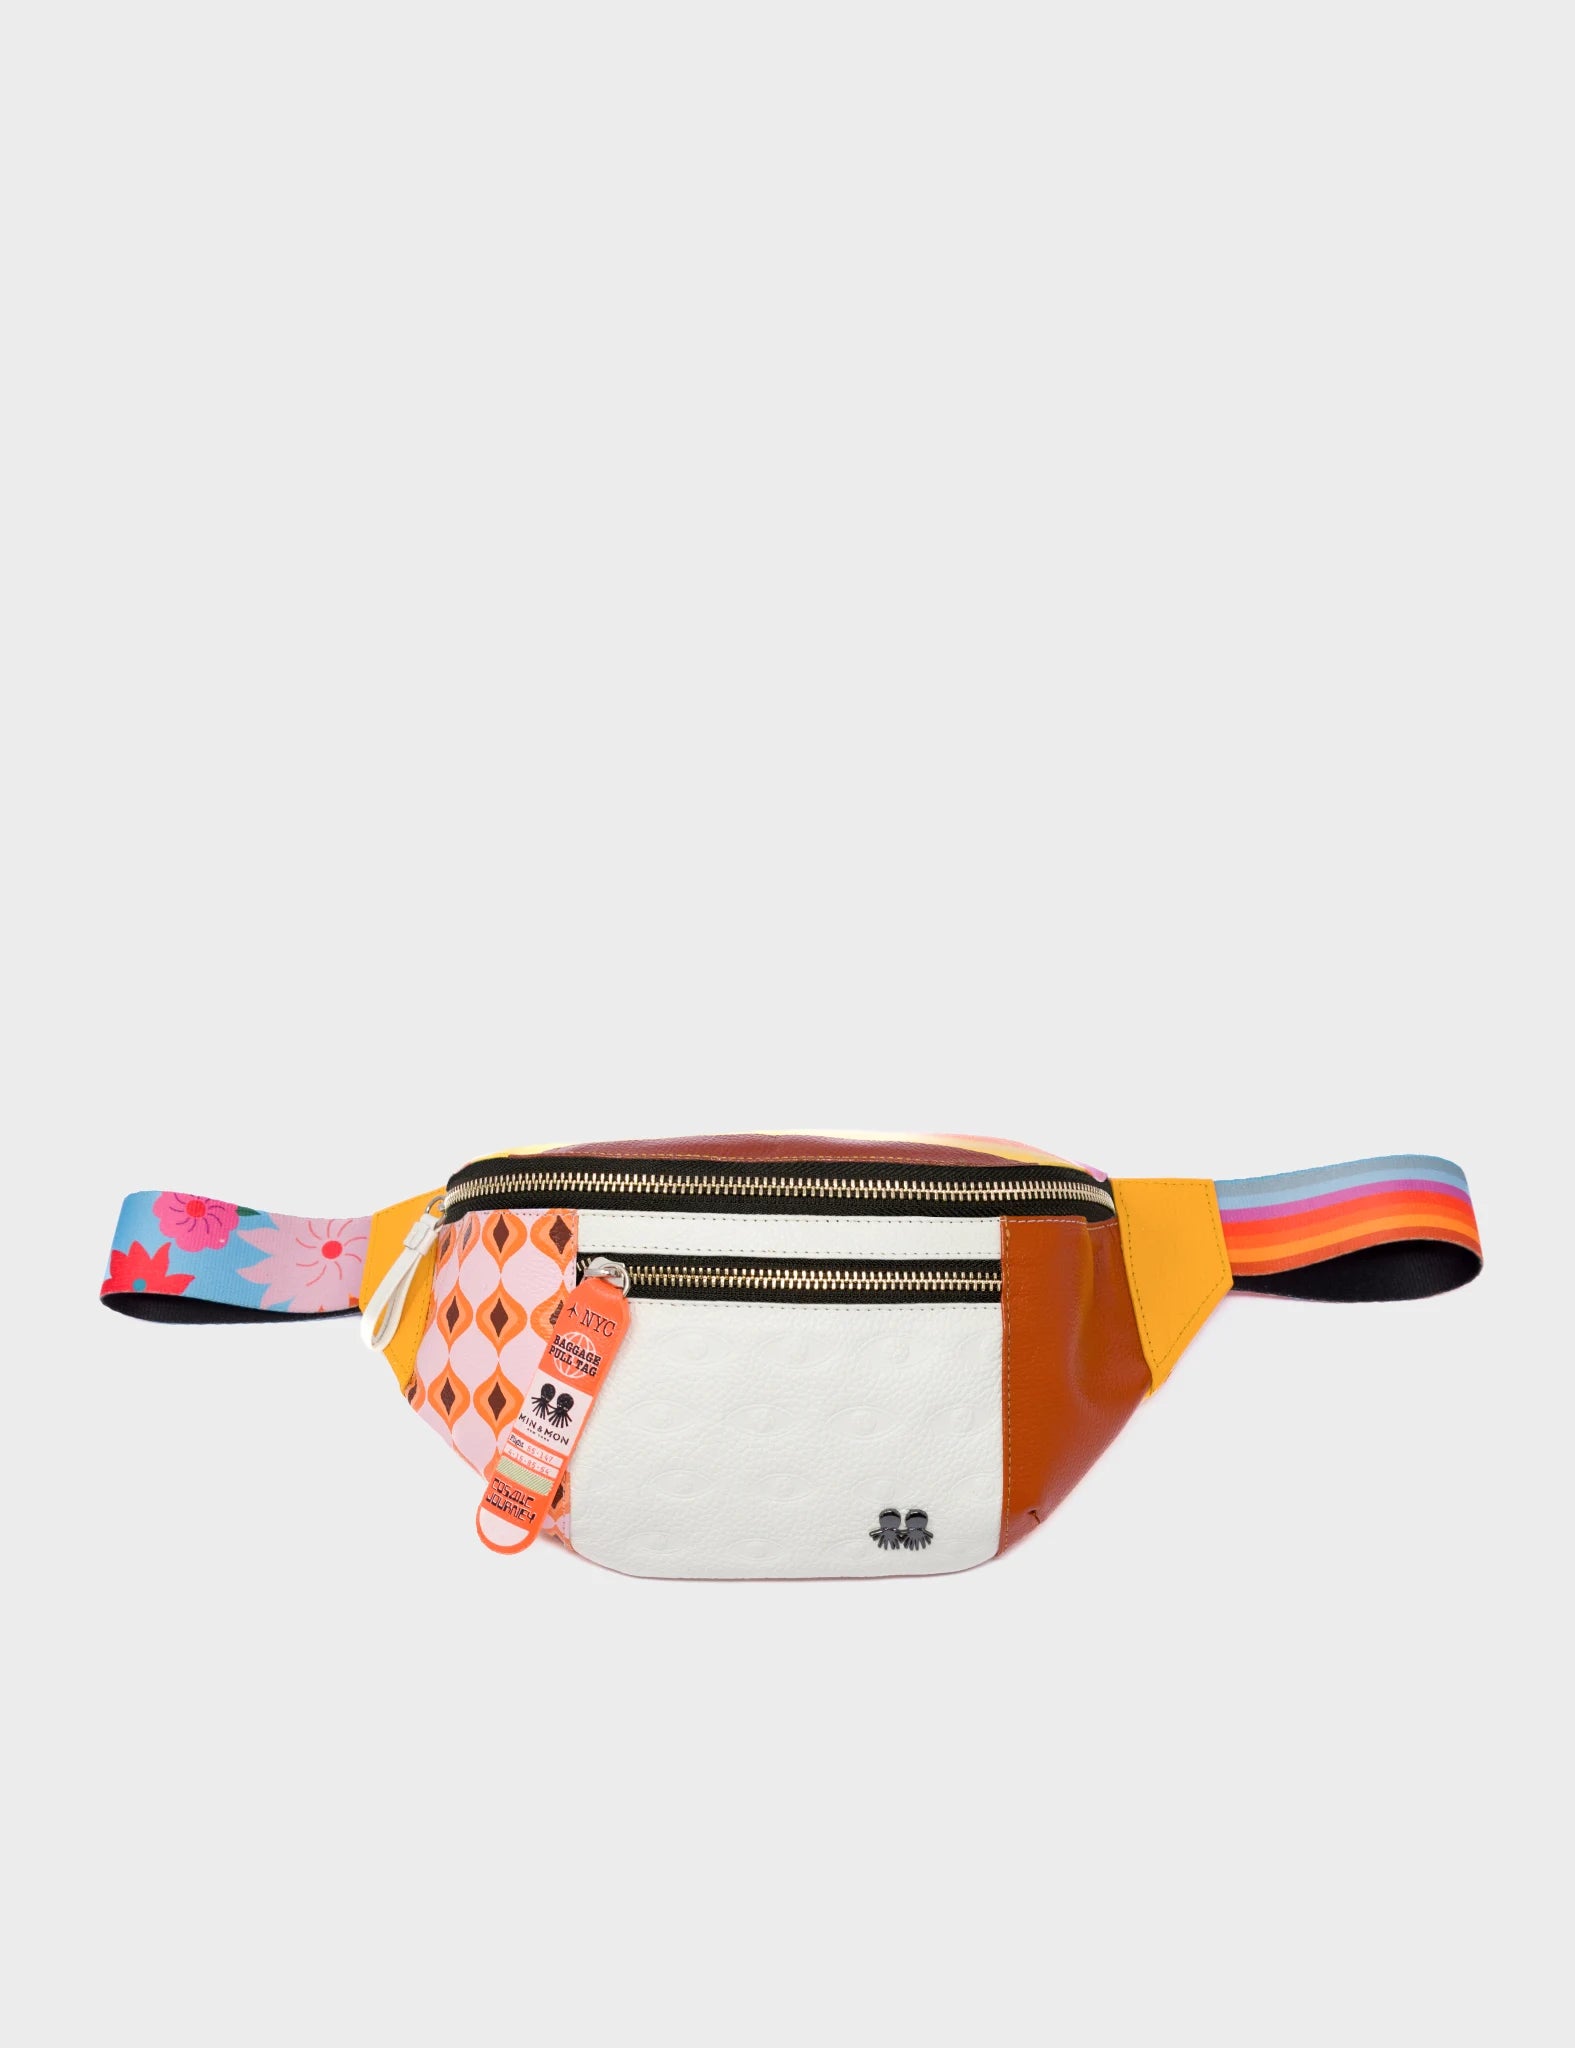 Fanny Pack Cream And Marigold Leather - Eyes Pattern Debossed - Front 